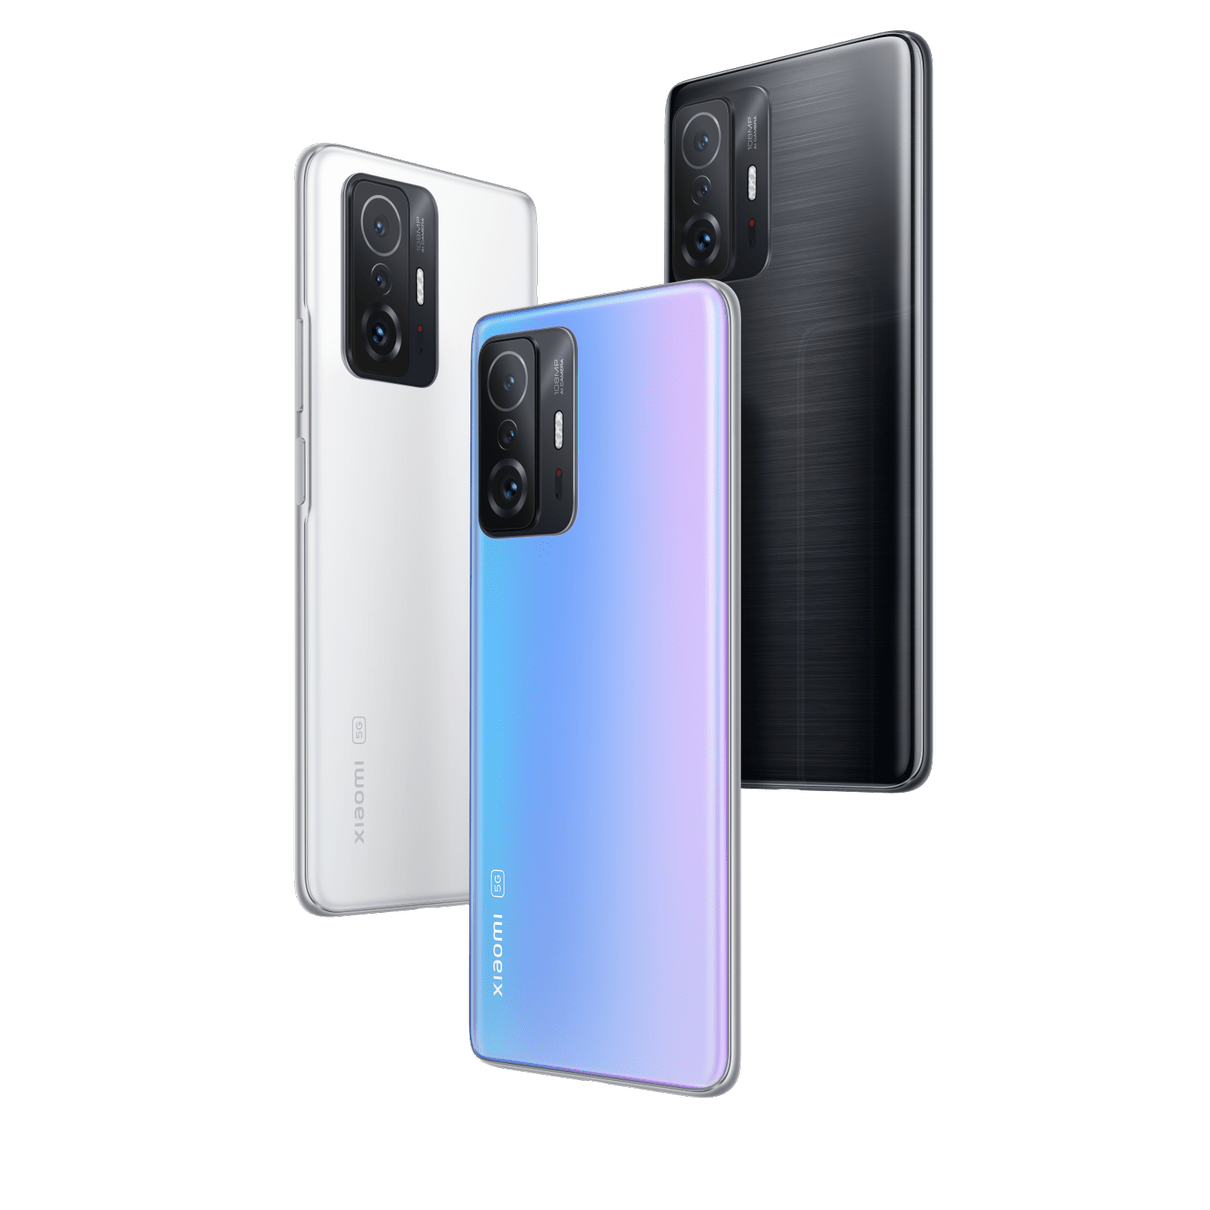 XIAOMI INTRODUCES NEW ADDITIONS TO THE CREATOR-FOCUSED XIAOMI 11 FAMILY